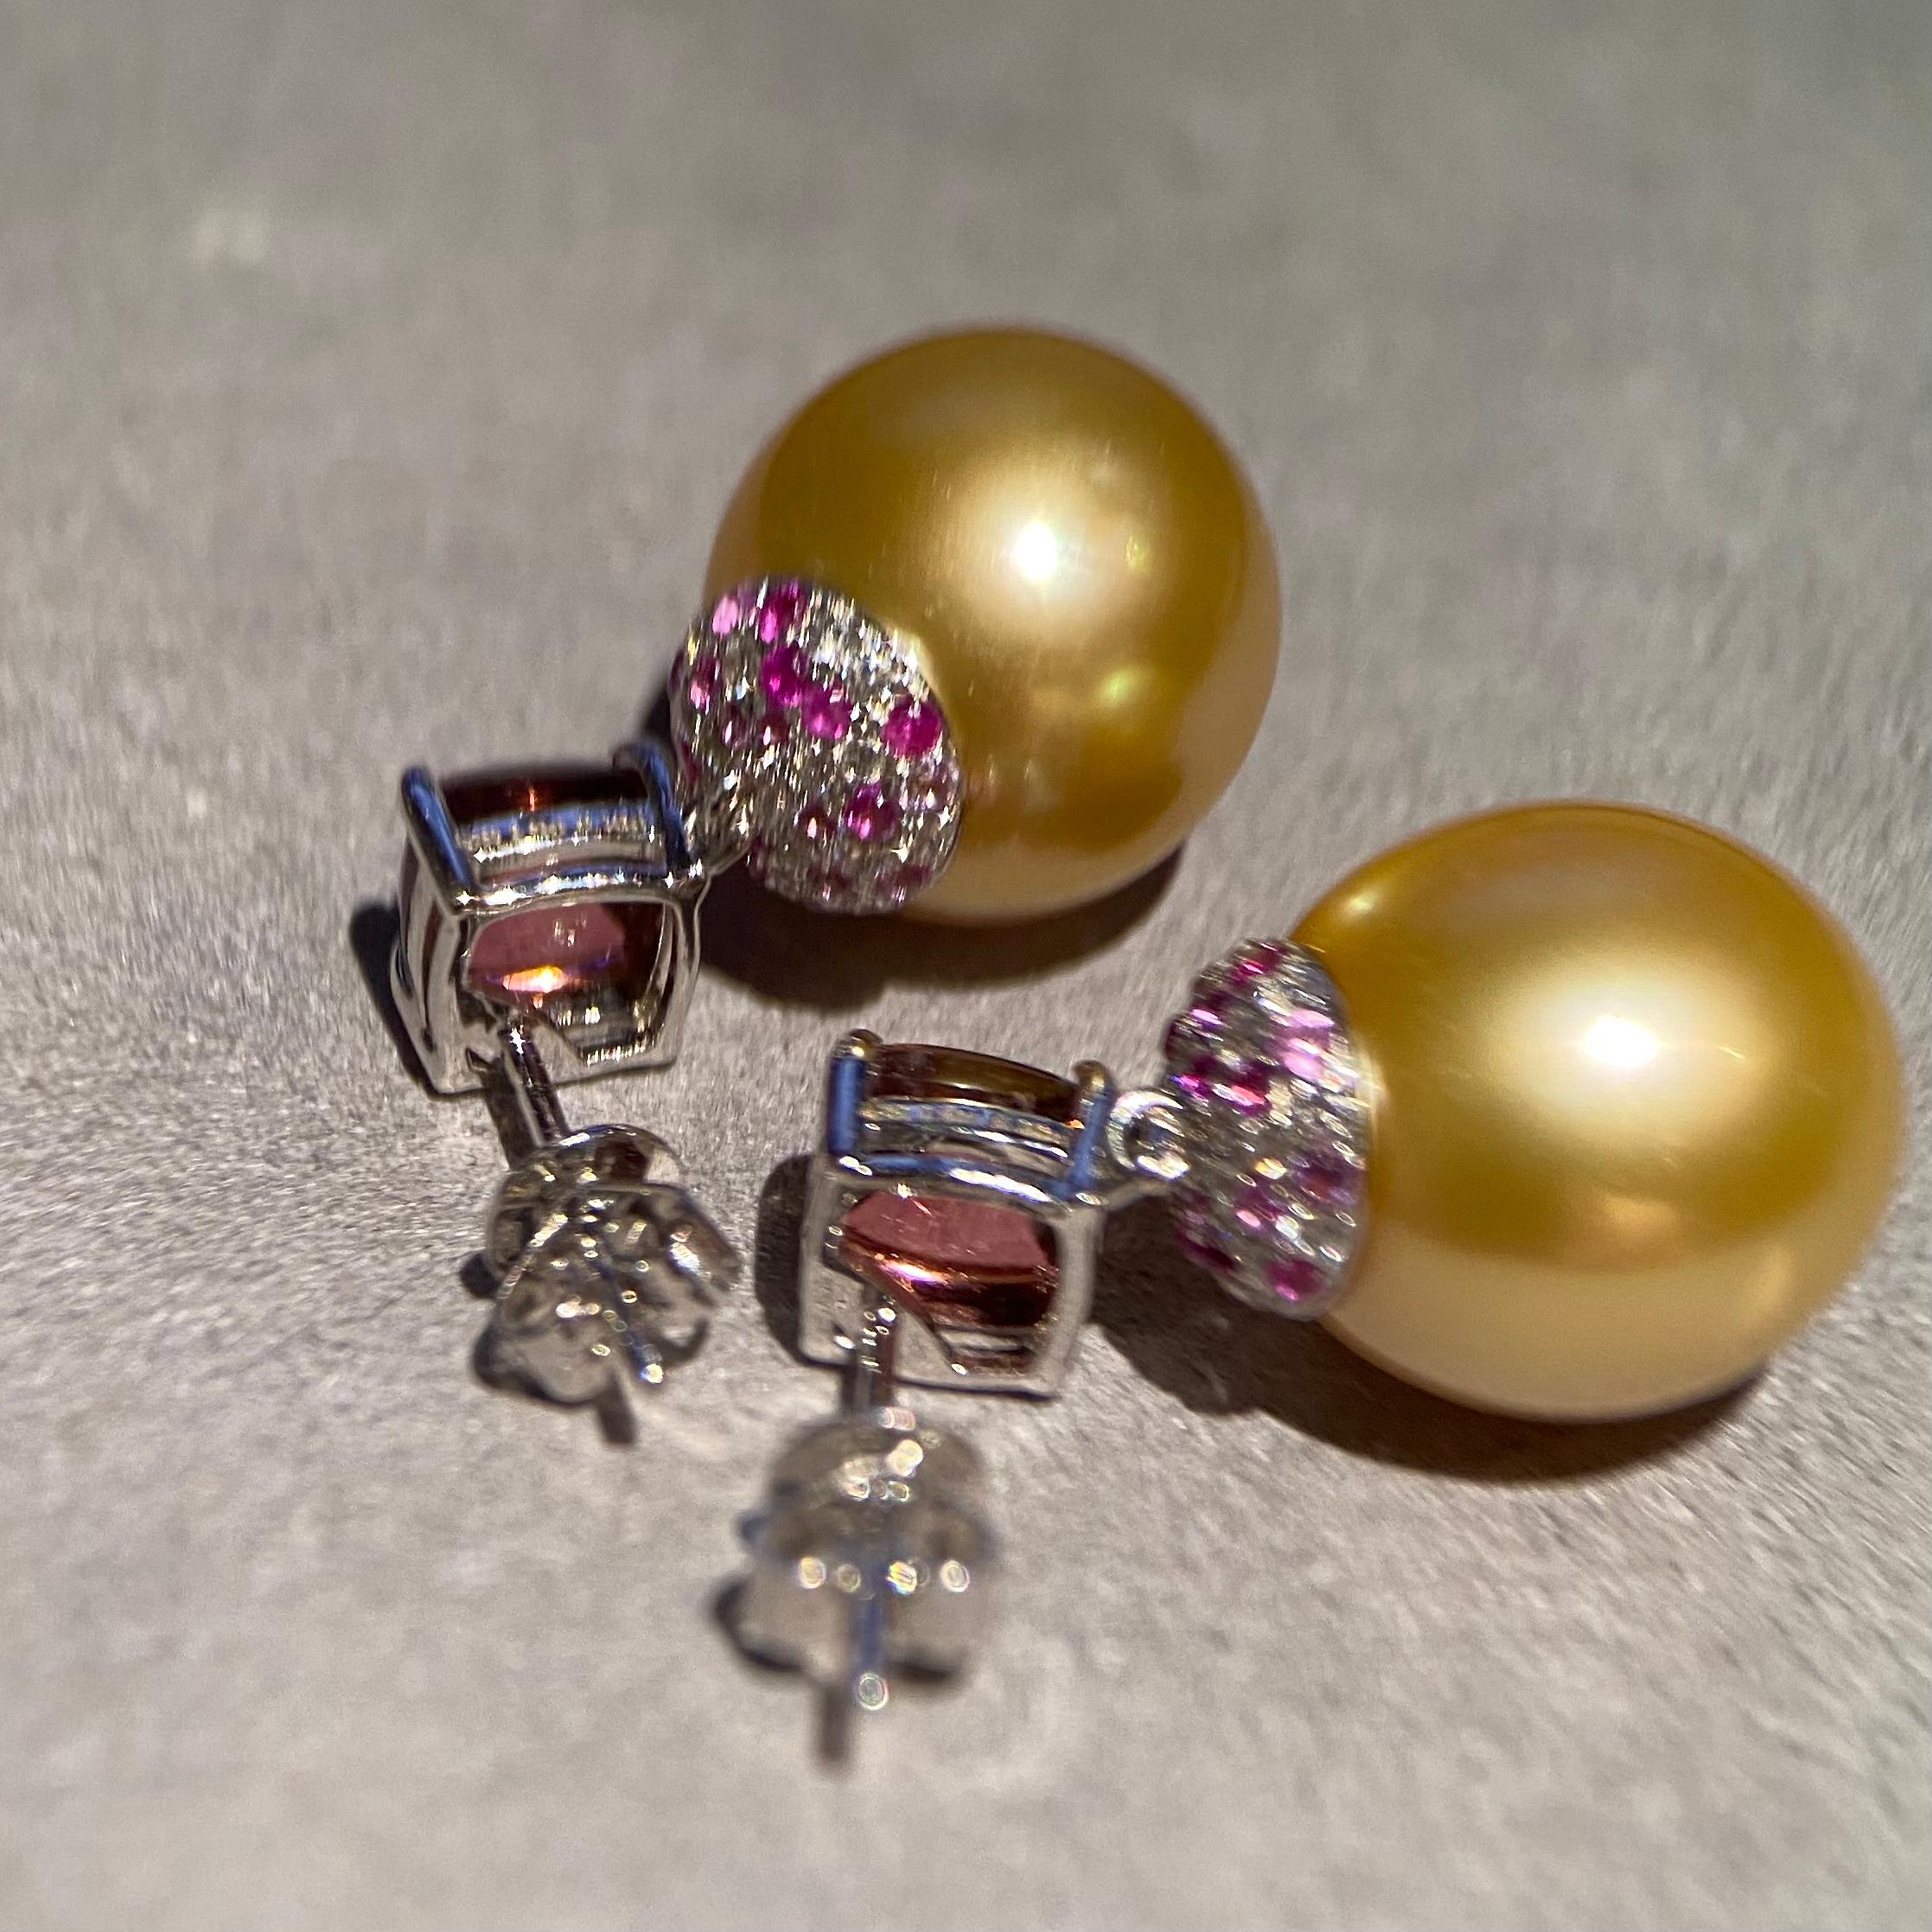 This is a pair of dangle earring with Golden South Sea Pearls suspending below the sugarloaf Rubilite. The design of the earring is a very simple yet popular design. It consists of 2 major components, one is the Ear Stud main stone motif and the